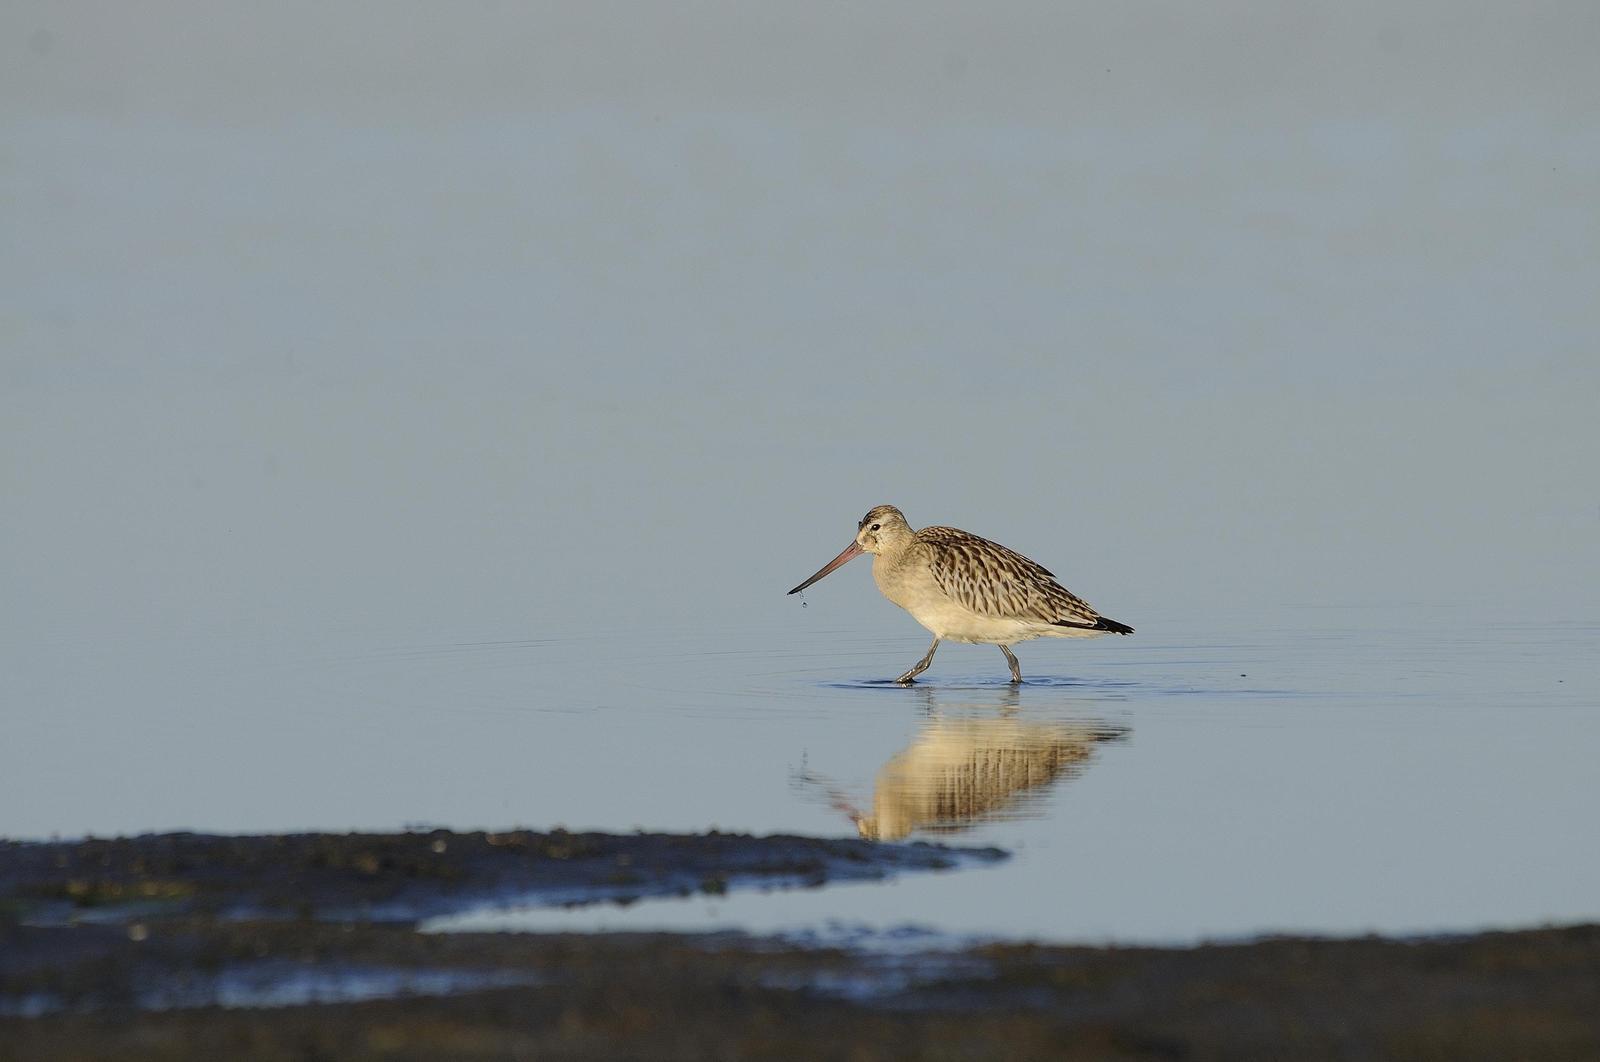 Bar-tailed Godwit Photo by Andres Rios